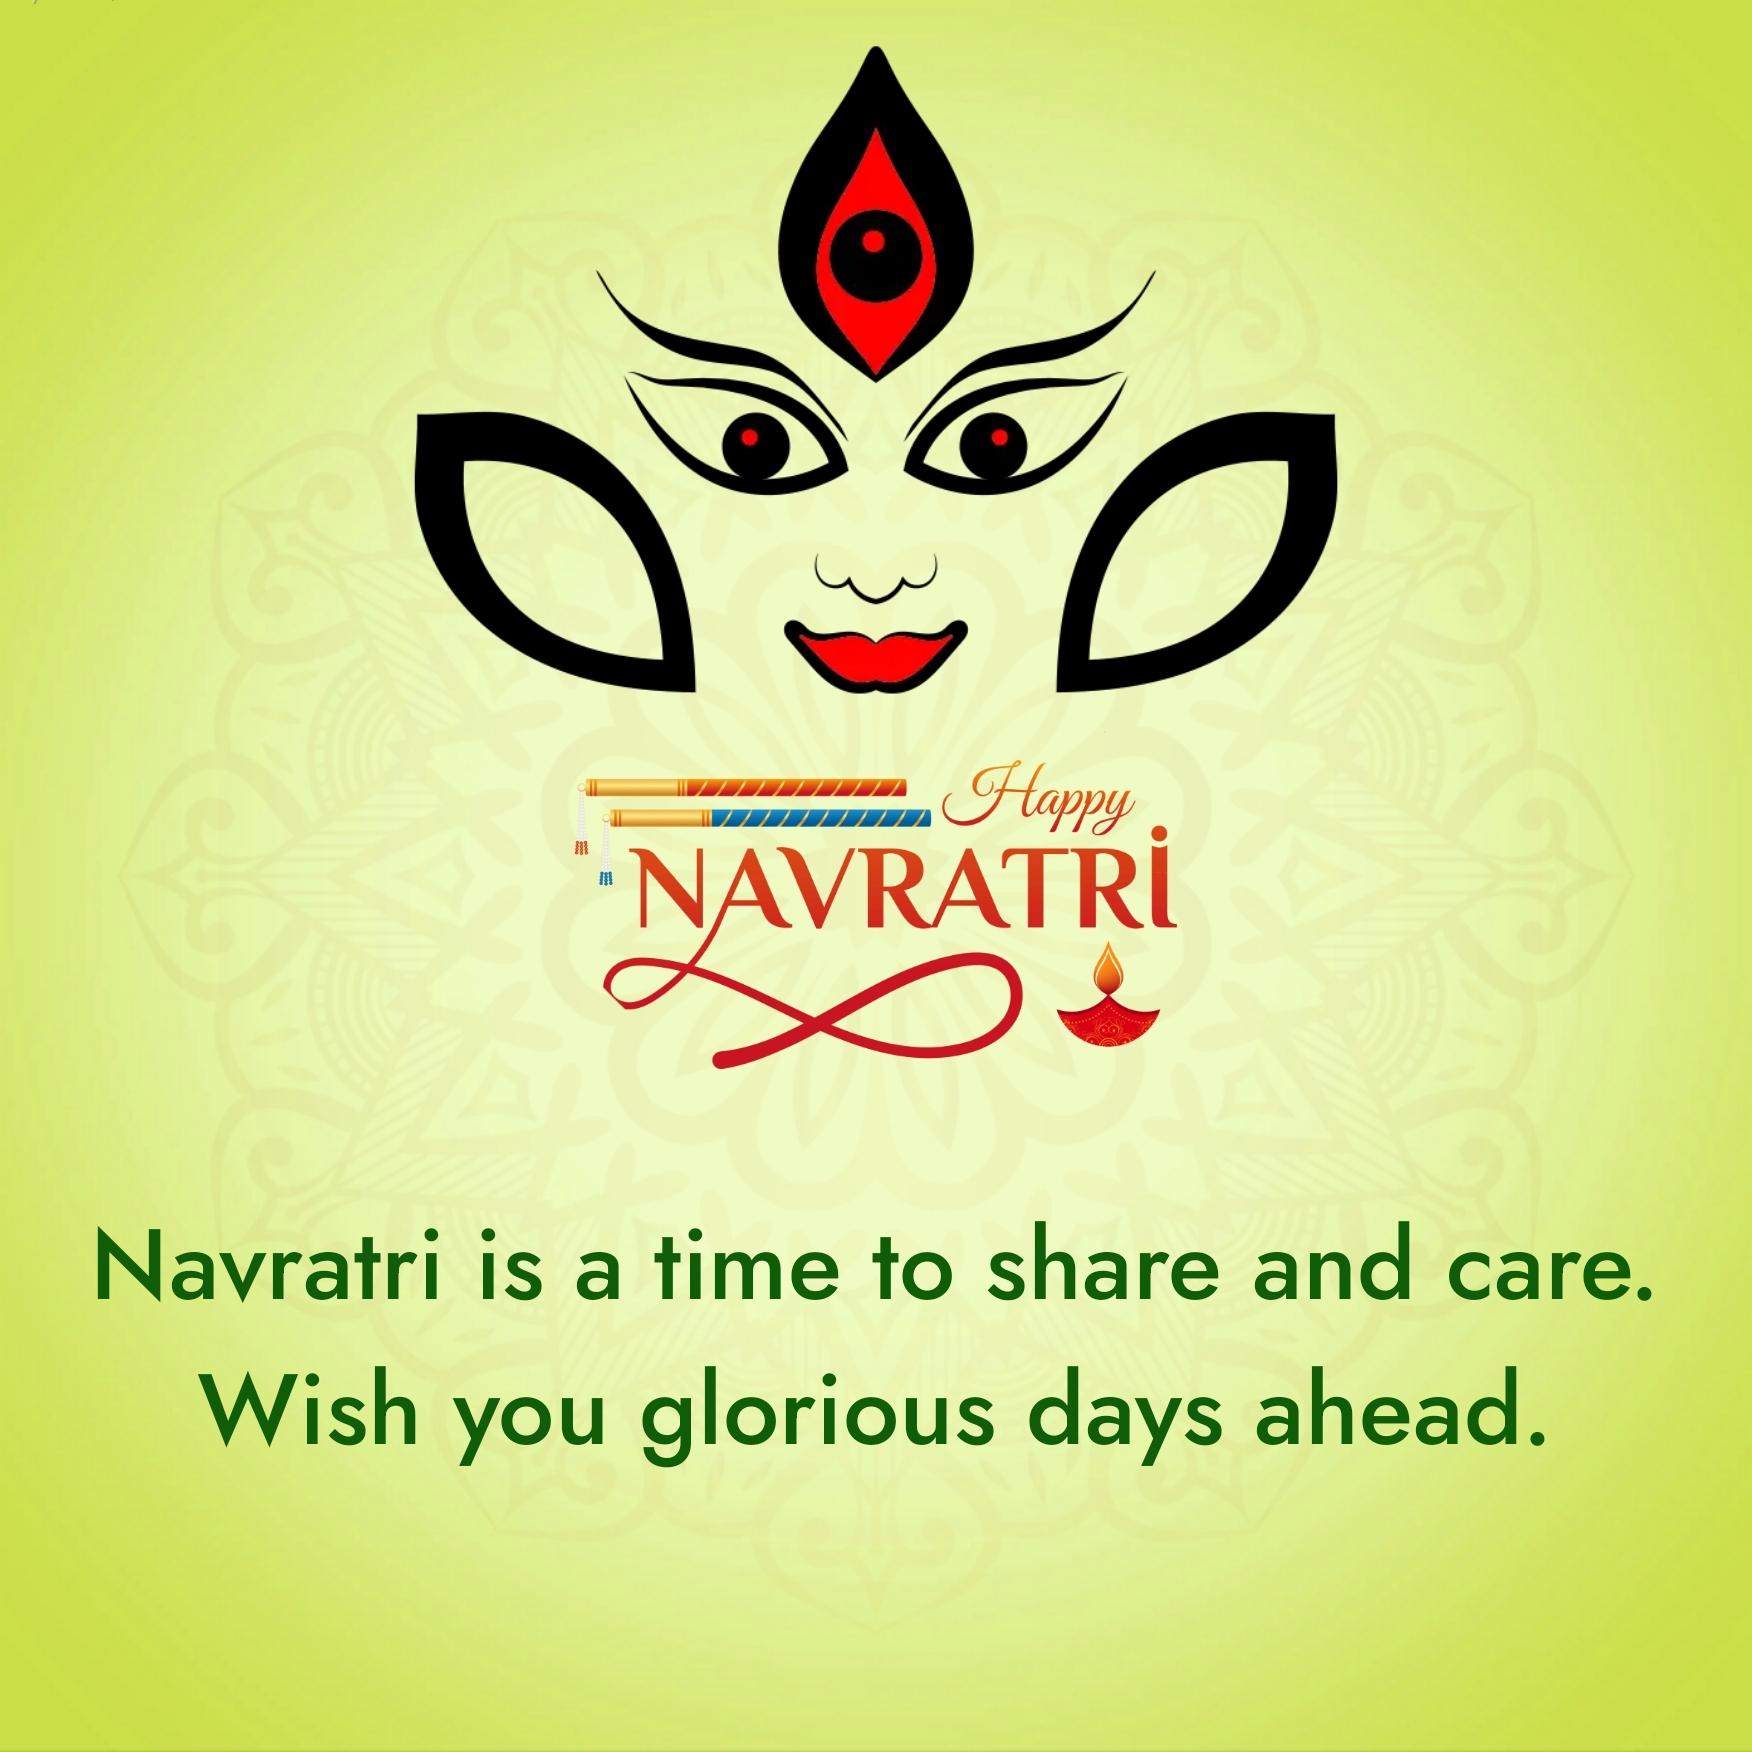 Navratri is a time to share and care